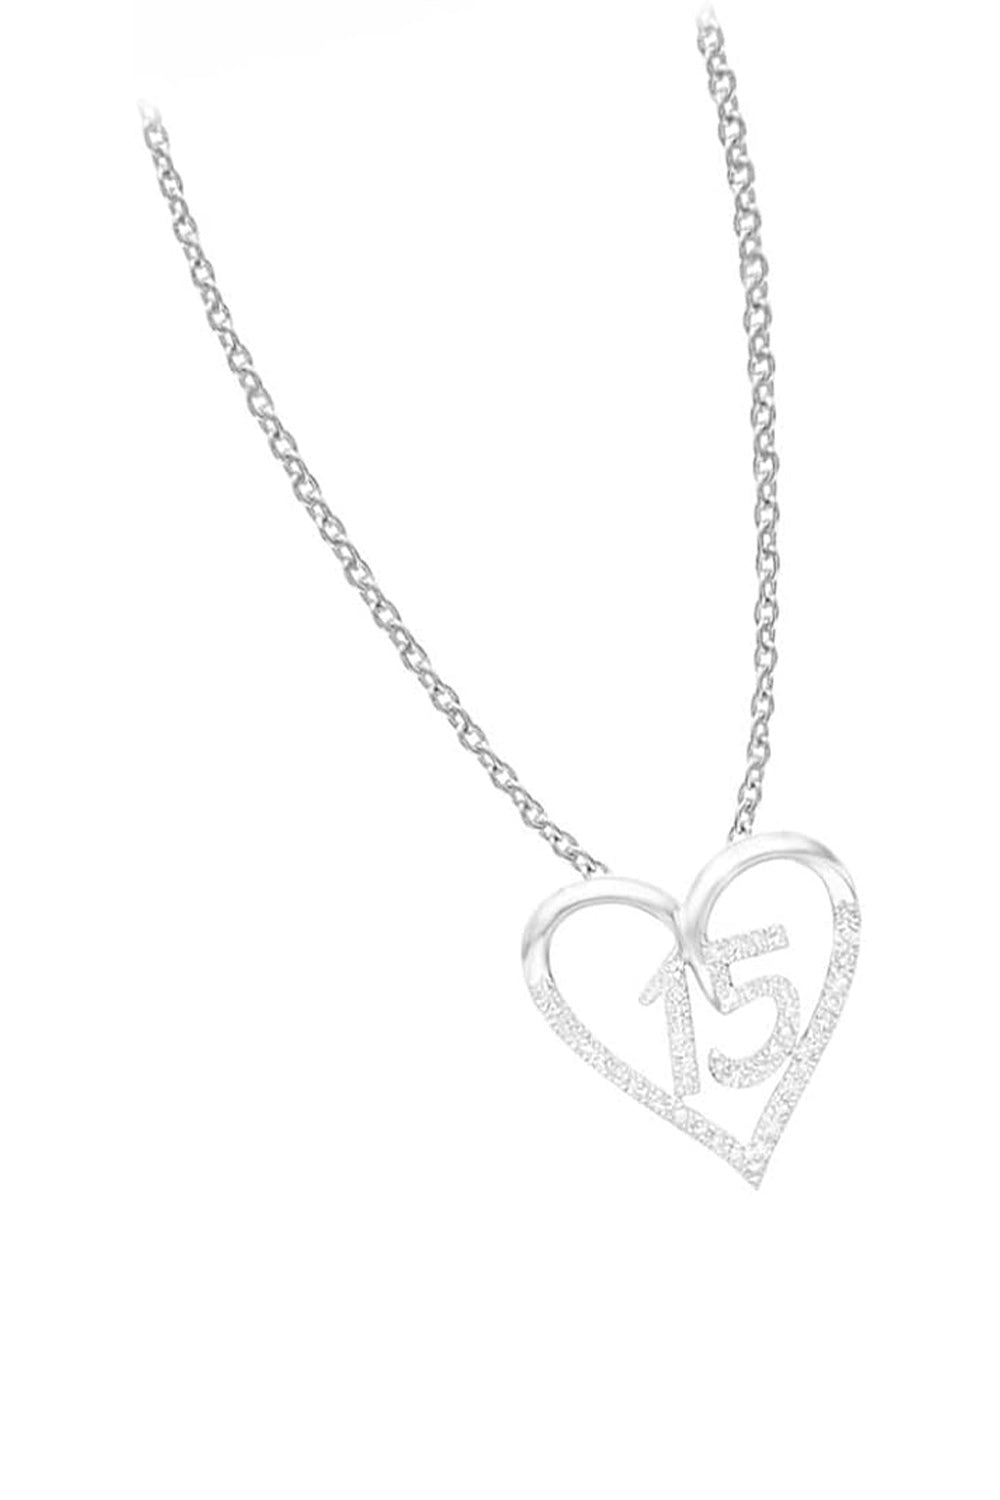 White Gold Color 15 Years Love Heart Pendant Necklace, Buy Pendants Online 